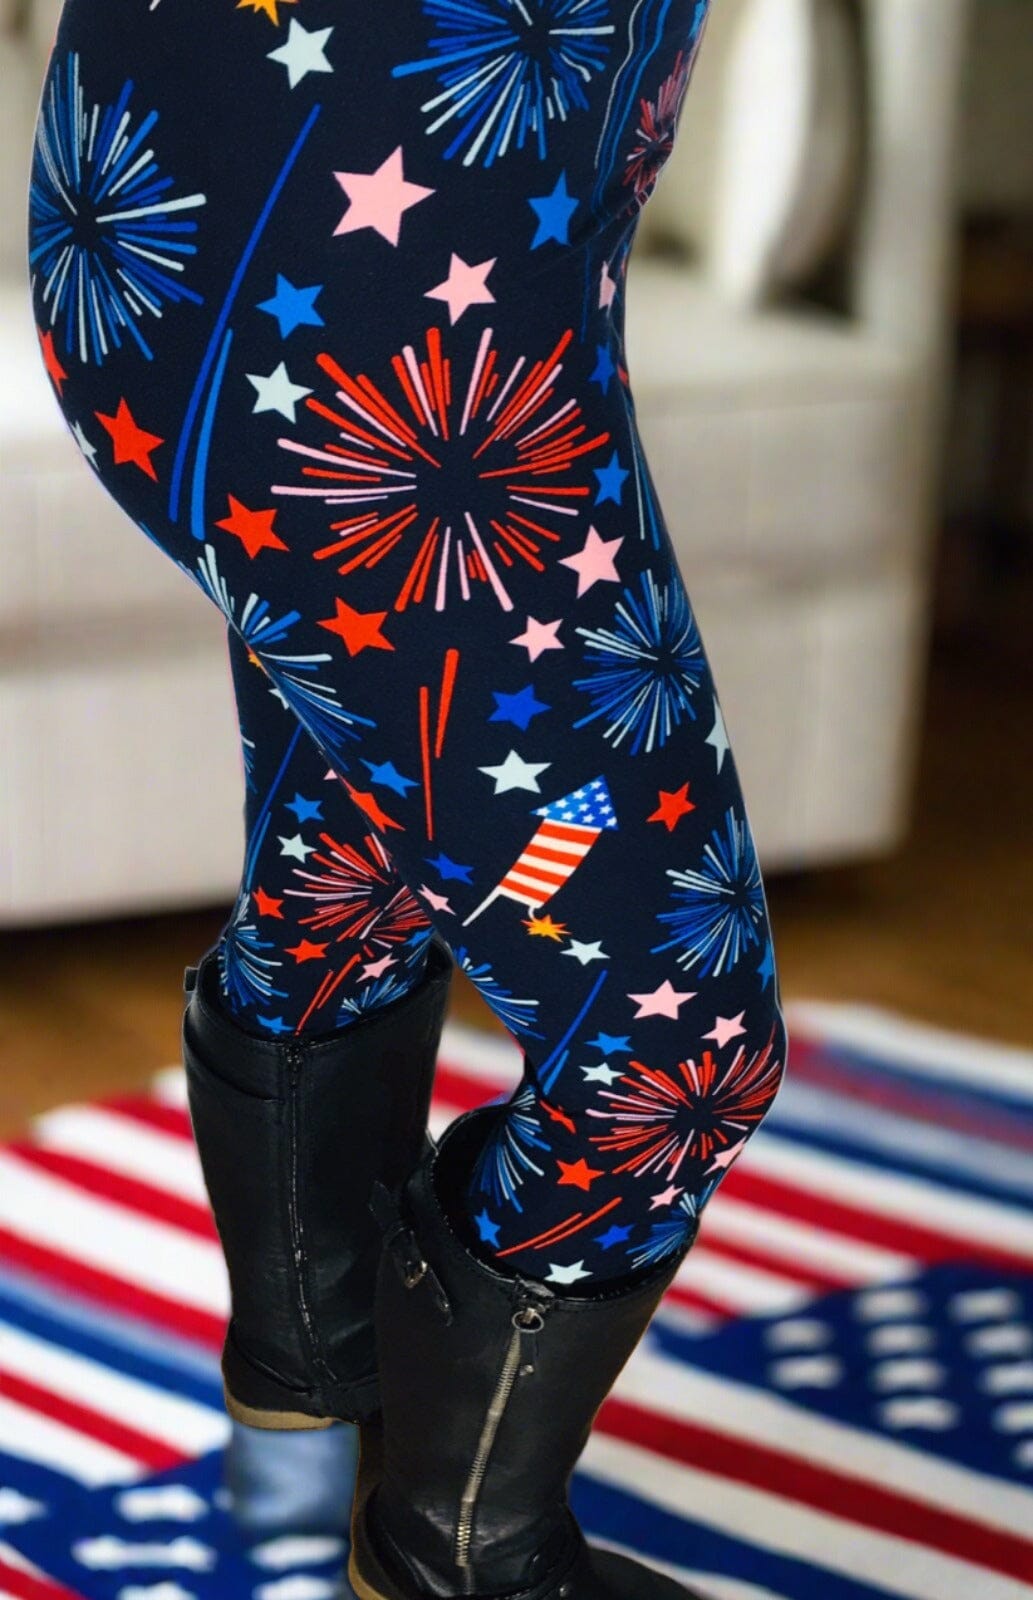 Womens Patriotic American Flag Sparkles 4th of July Leggings Soft Yoga Pants Sizes 0-18 Leggings MomMe and More 